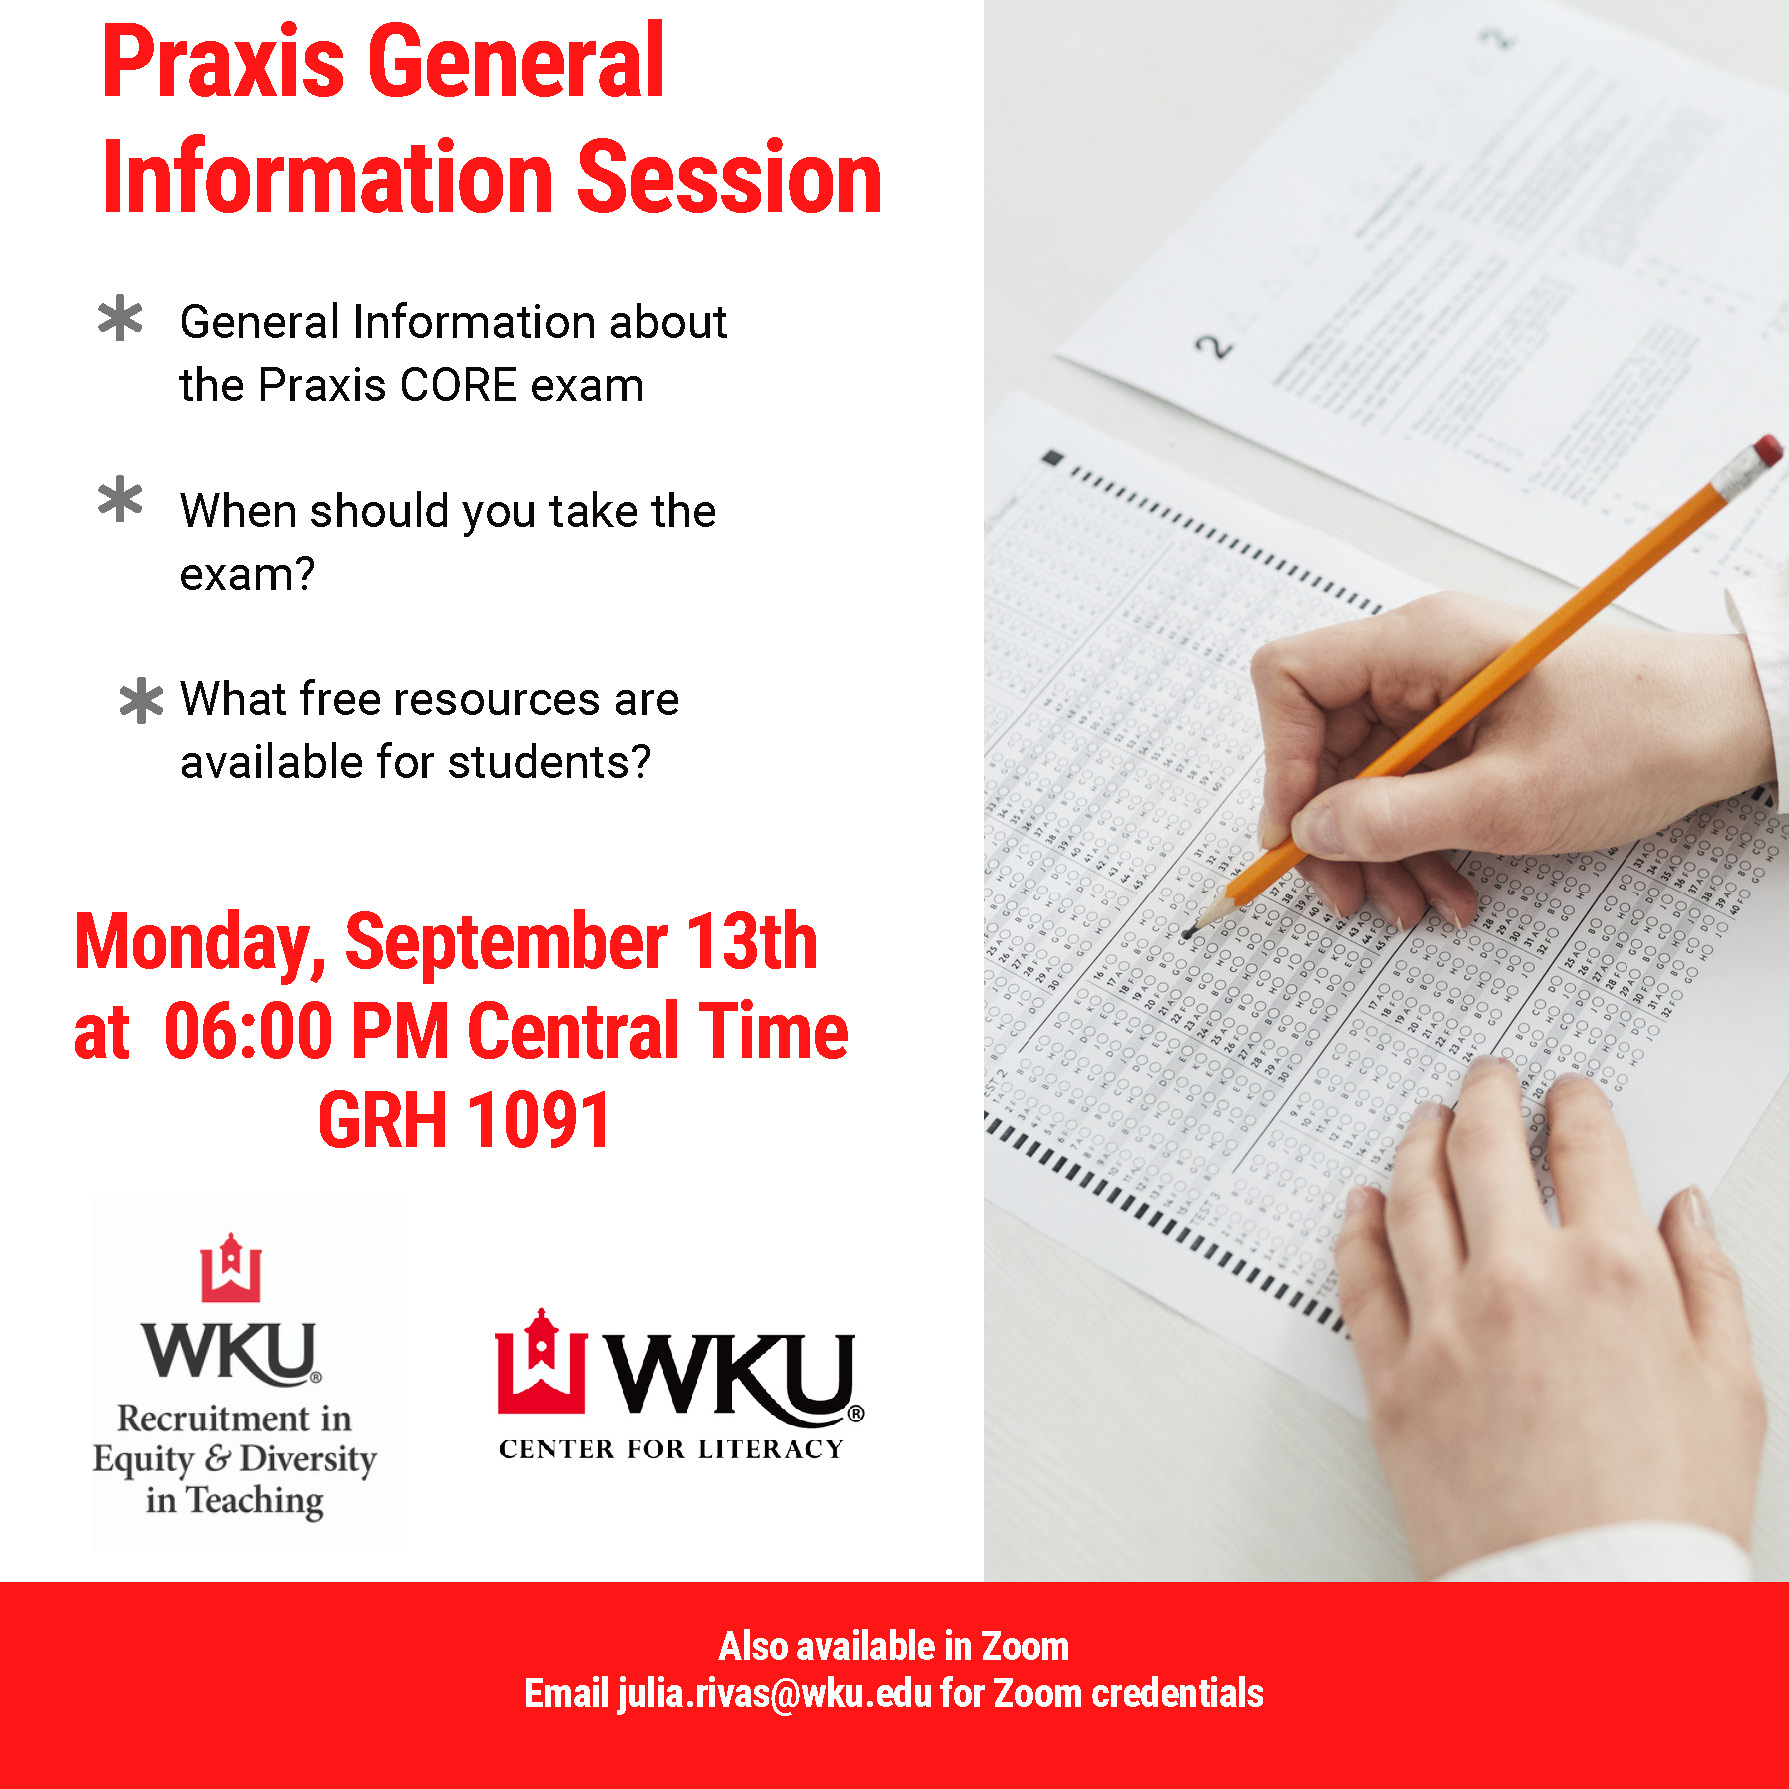 Praxis General Information Session